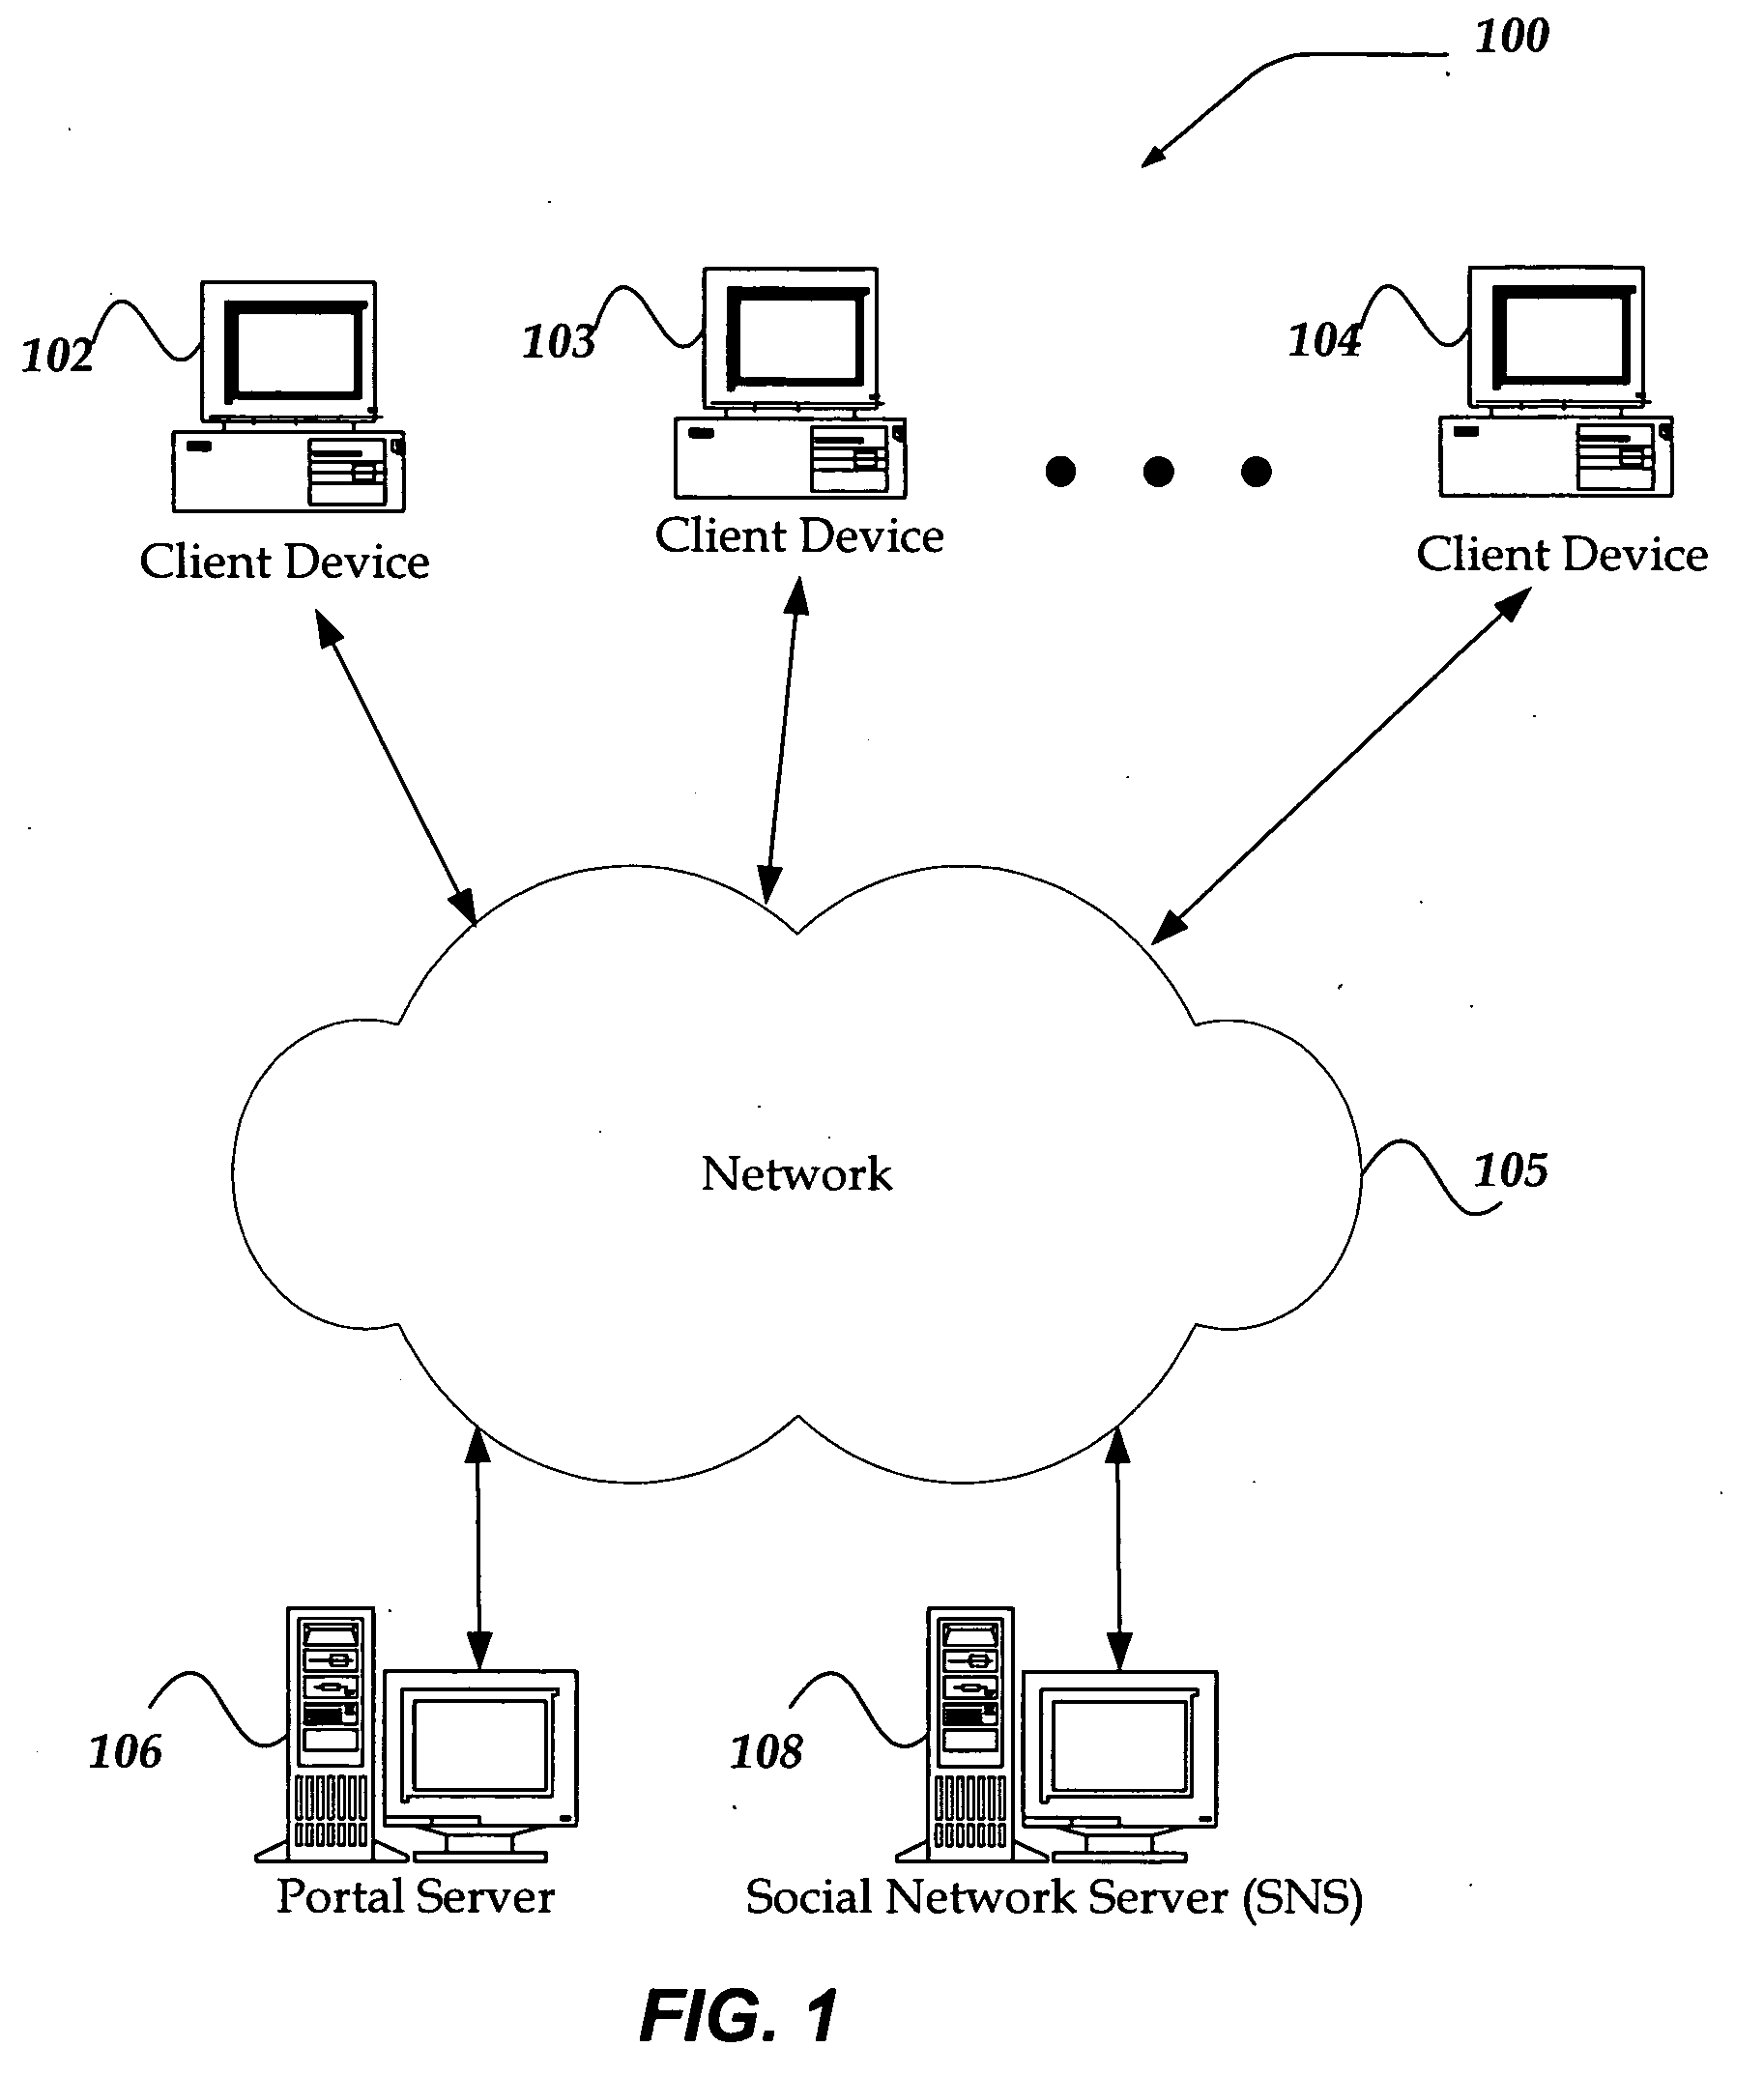 Method and system for sharing portal subscriber information in an online social network